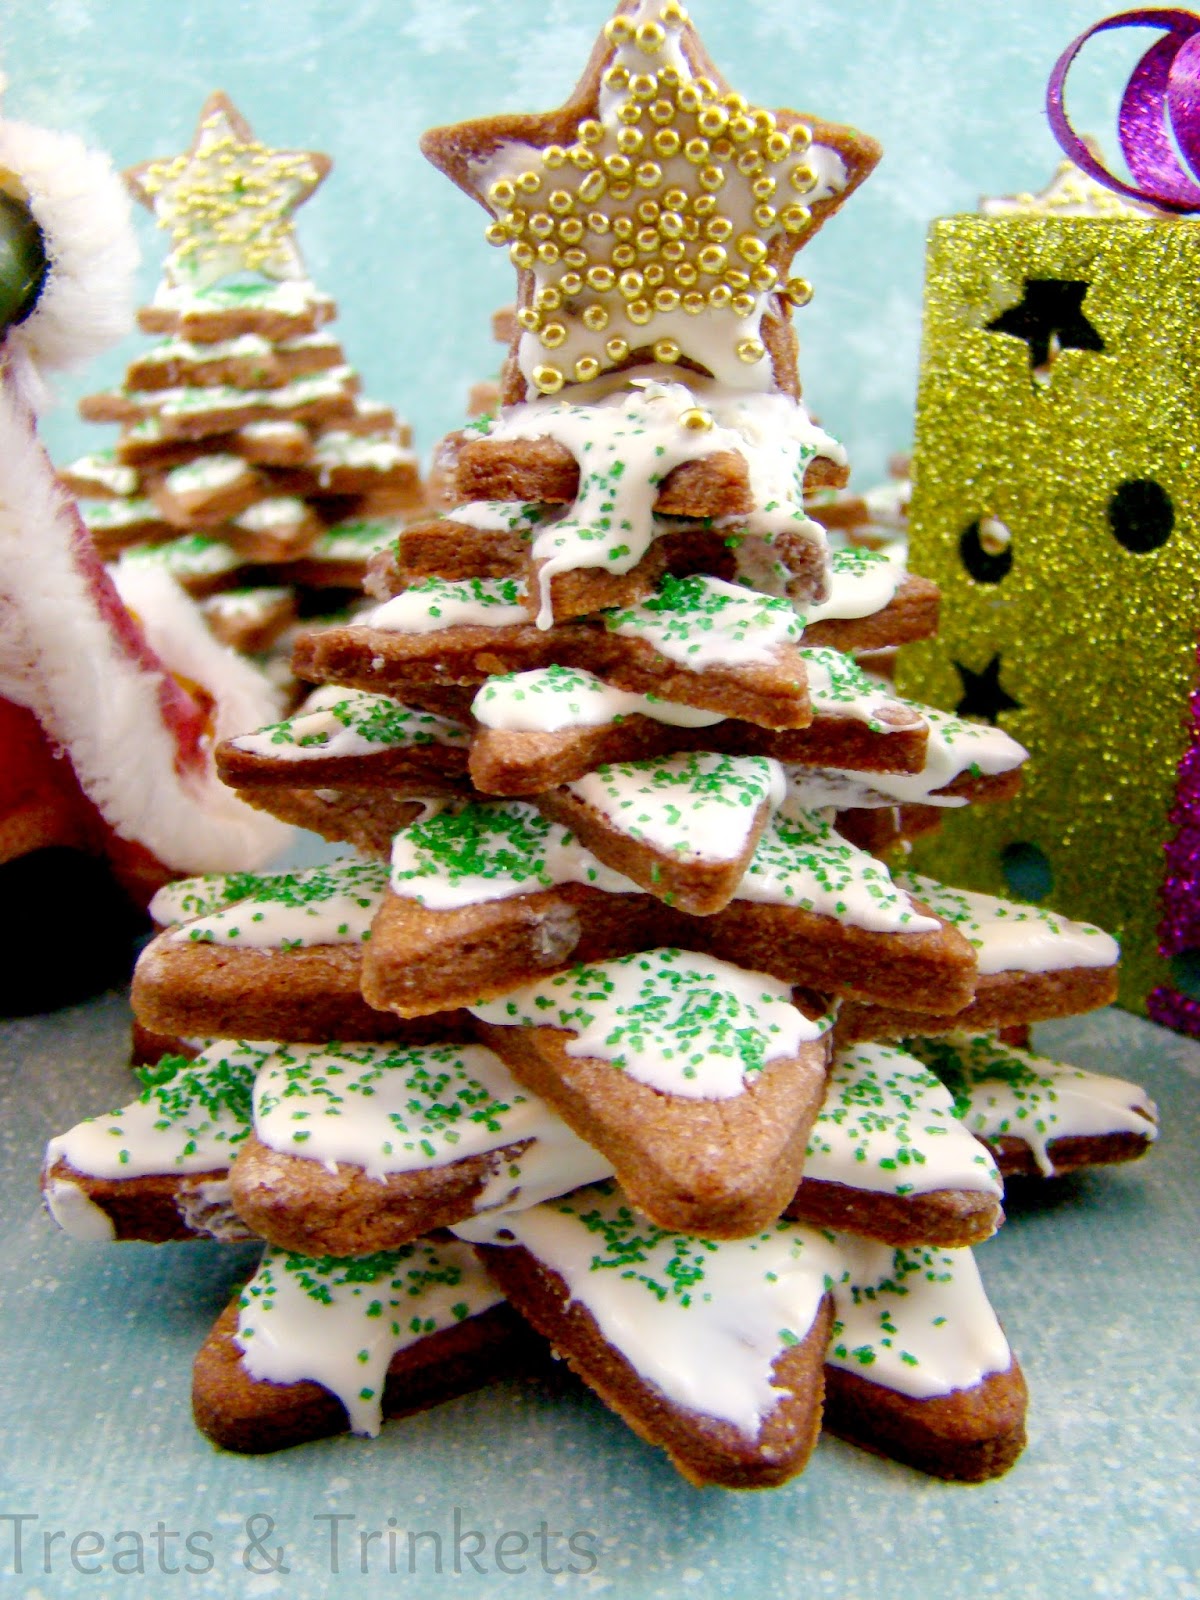 Treats & Trinkets: Christmas Tree Cookie Stacks & the Year in Review